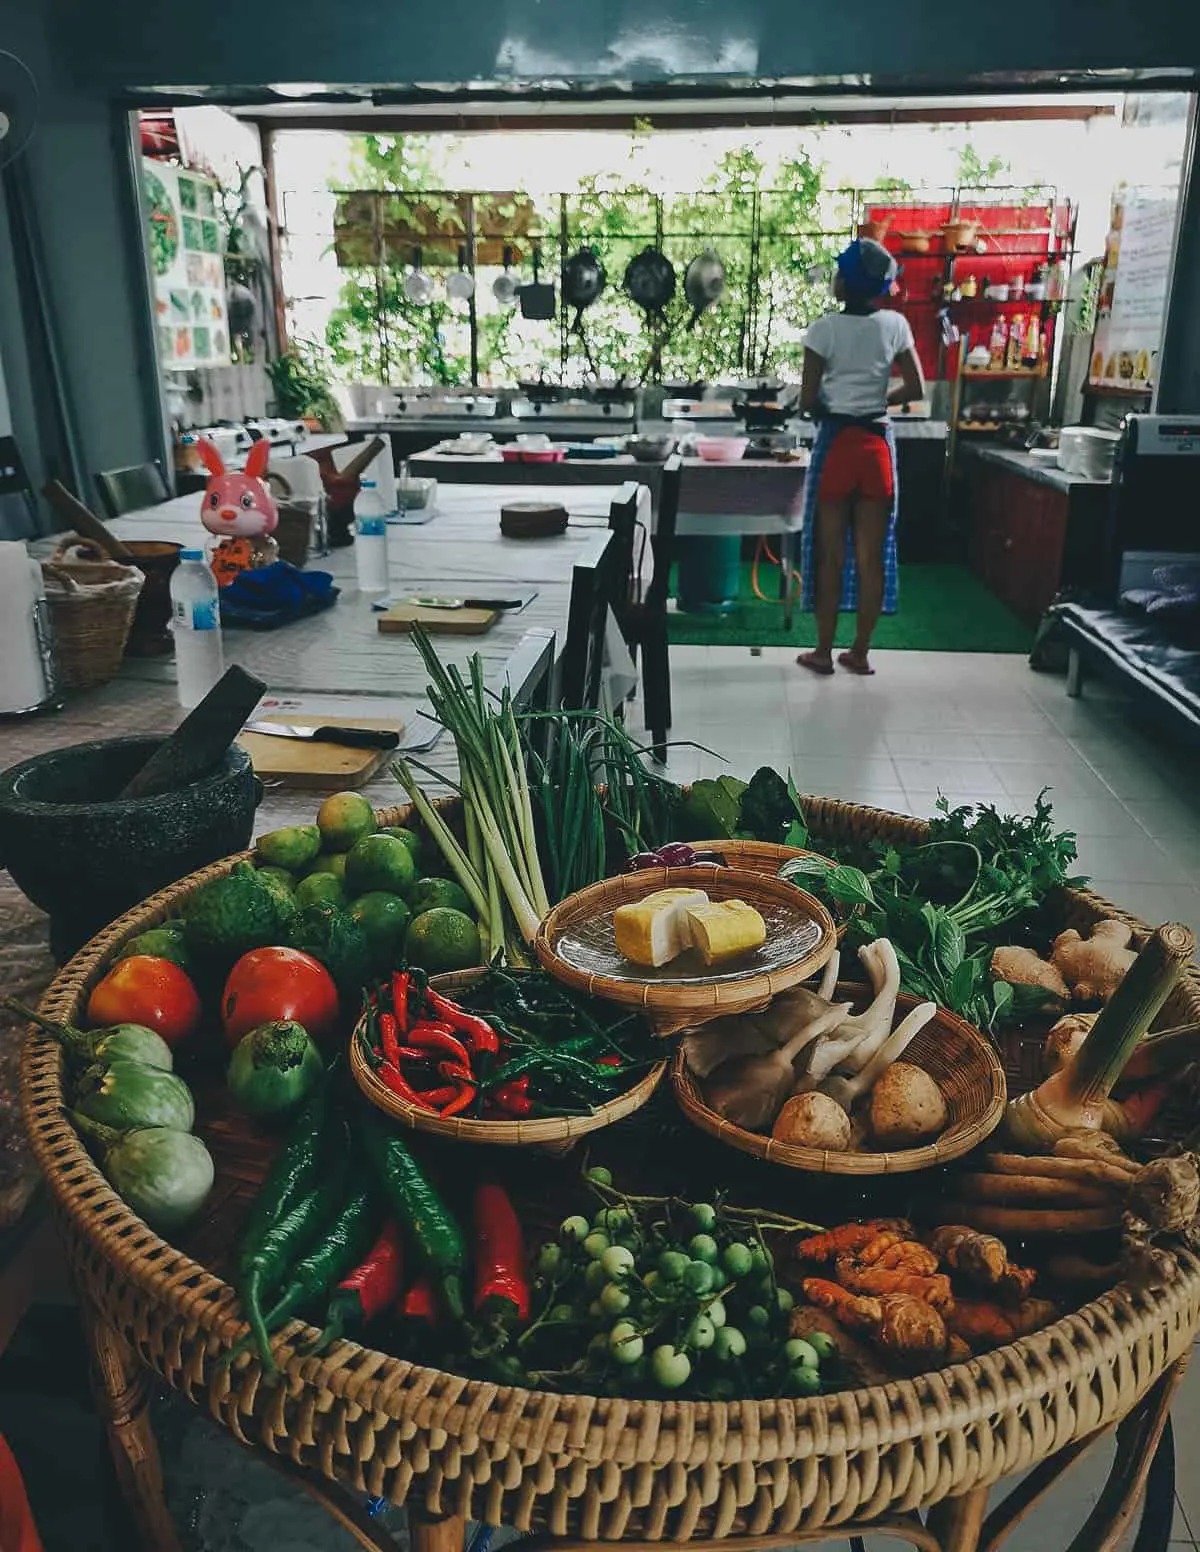 Ingredients for a cooking class in Thailand